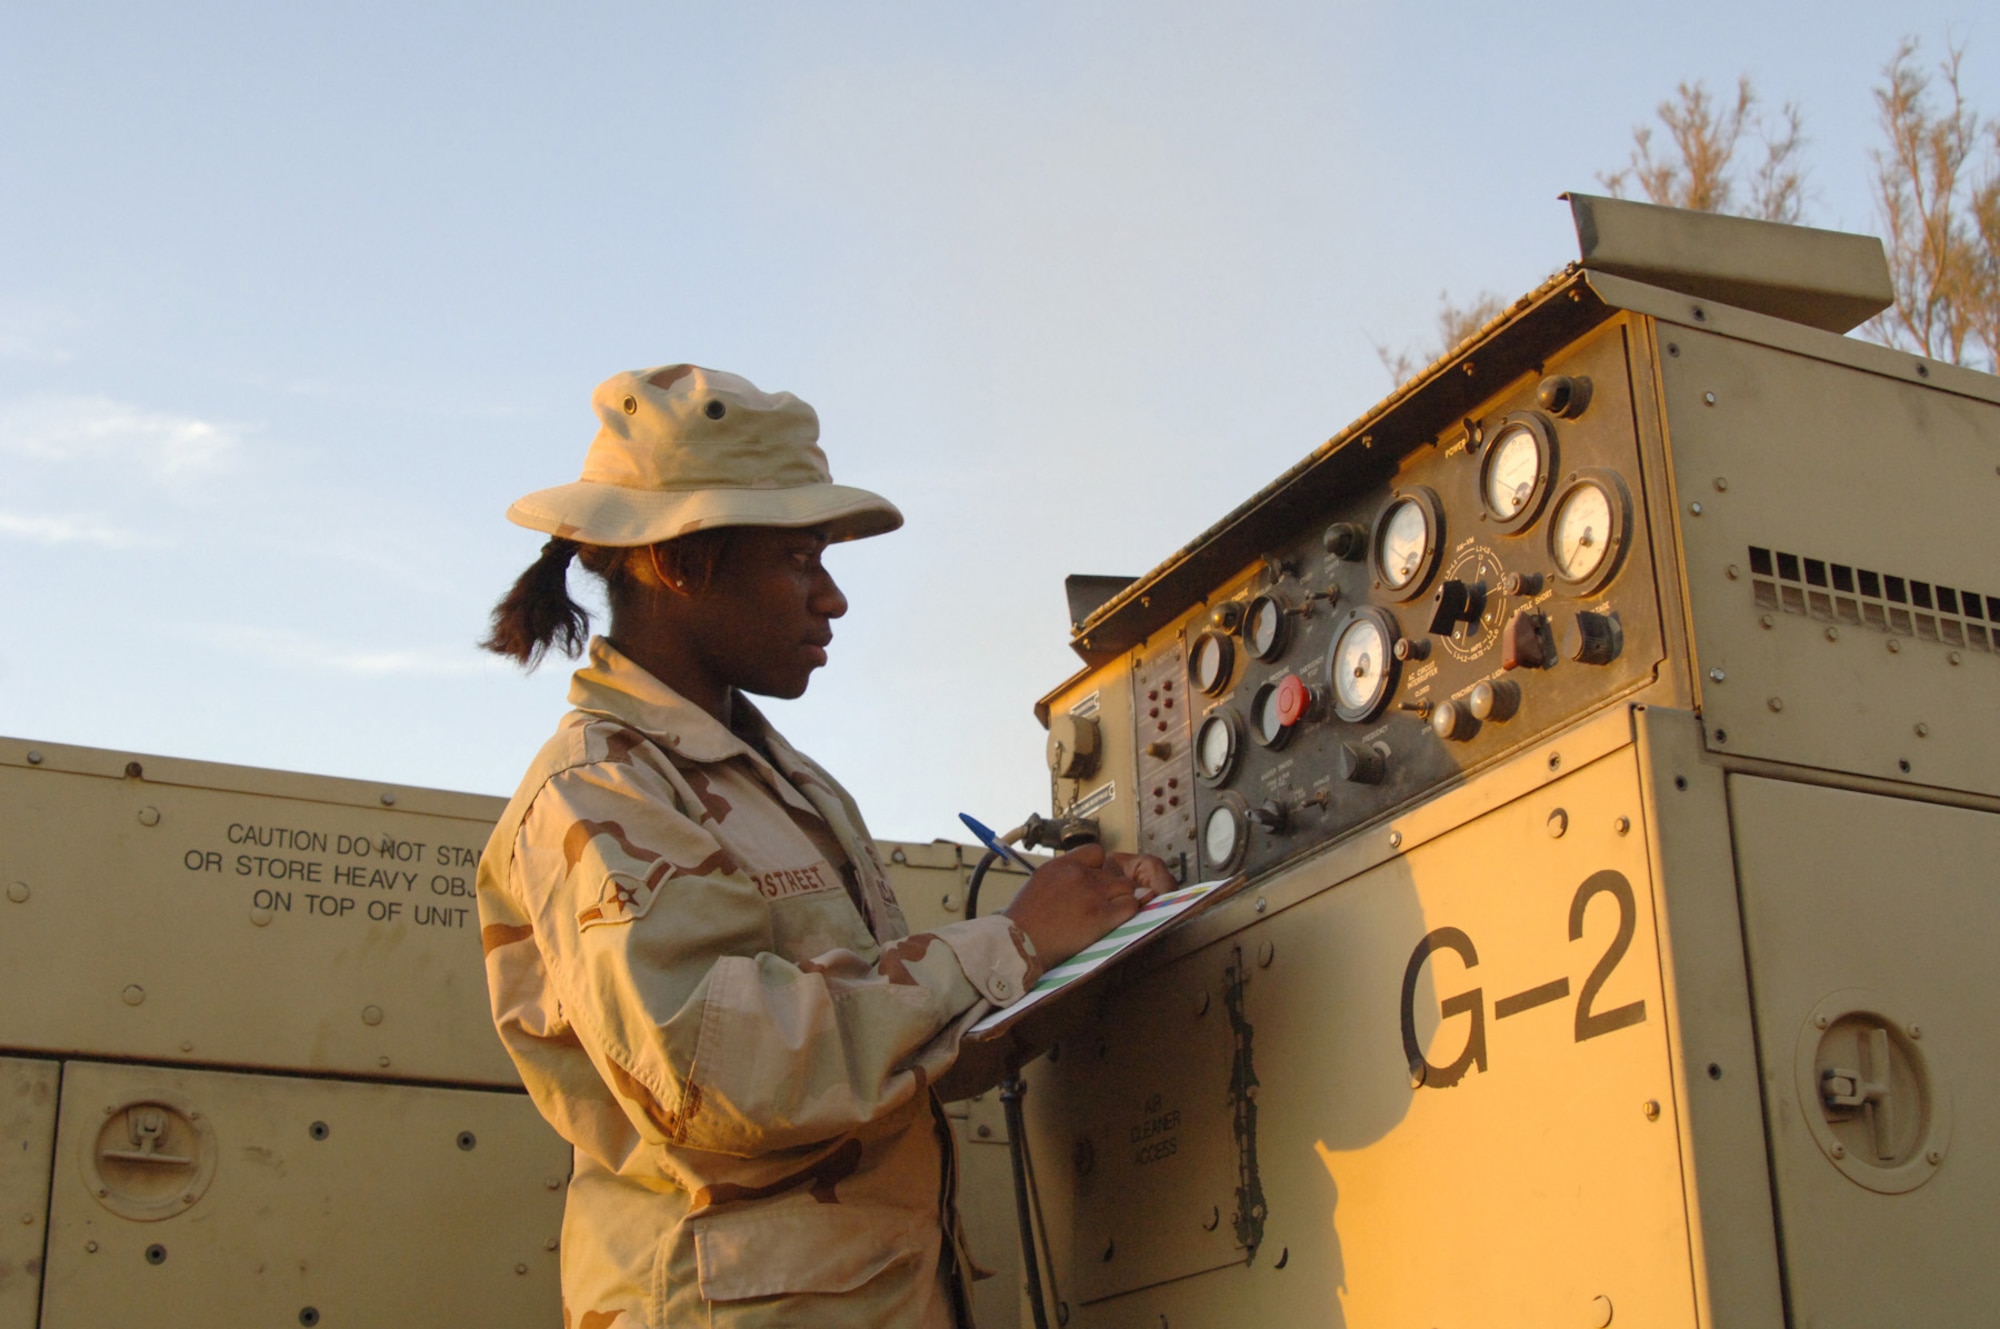 Balad Air Base, Iraq - Airman Yana Overstreet, an Air Ground Equipment (AGE) maintainer, conducts a routine systems check of a generator at Balad Air Base, Iraq. Airman Overstreet is assigned to the 727th Expeditionary Air Control Squadron (EACS) and is deployed from the 728th Air Control Squadron at Eglin Air Force Base, Fla. Also known as Kingpin, the self-sustaining 727th EACS is comprised of nealry 200 Airmen from 27 different Air Force specialties. AGE maintainers are critical to supplying unique power requirements to Kingpin's radar control equipment, ensuring positive control over aircraft operating in Iraq's 277,000 miles of airspace. (U.S. Air Force photo/Major Damien Pickart)               